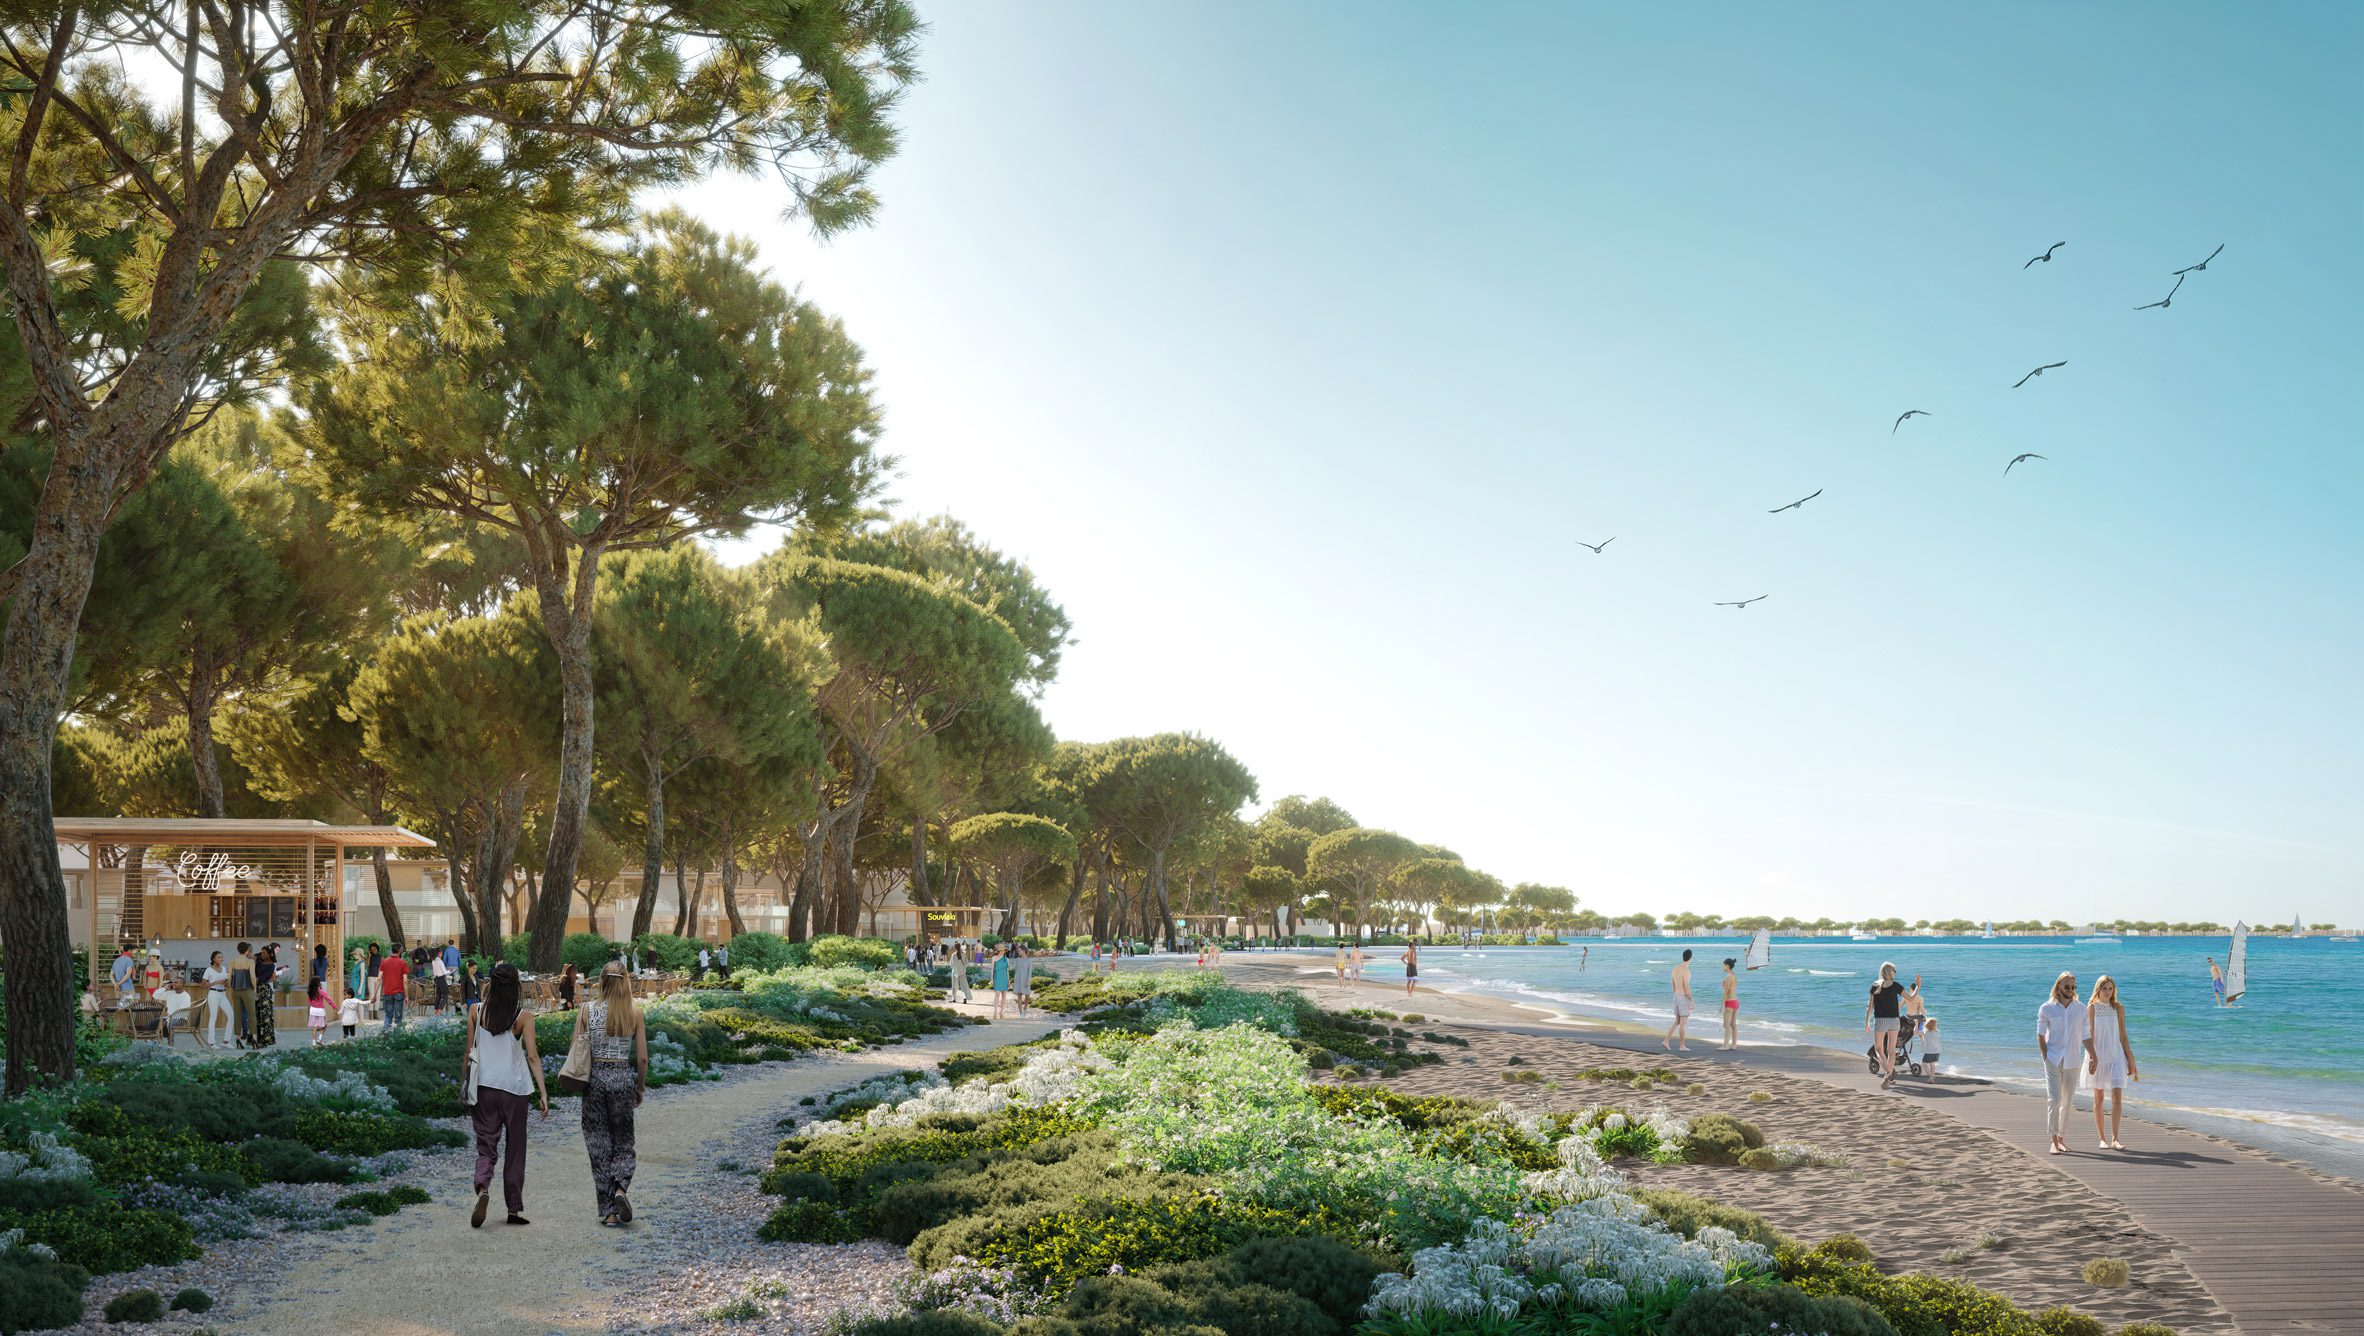 Beach in Cyprus planned by Foster + Partners